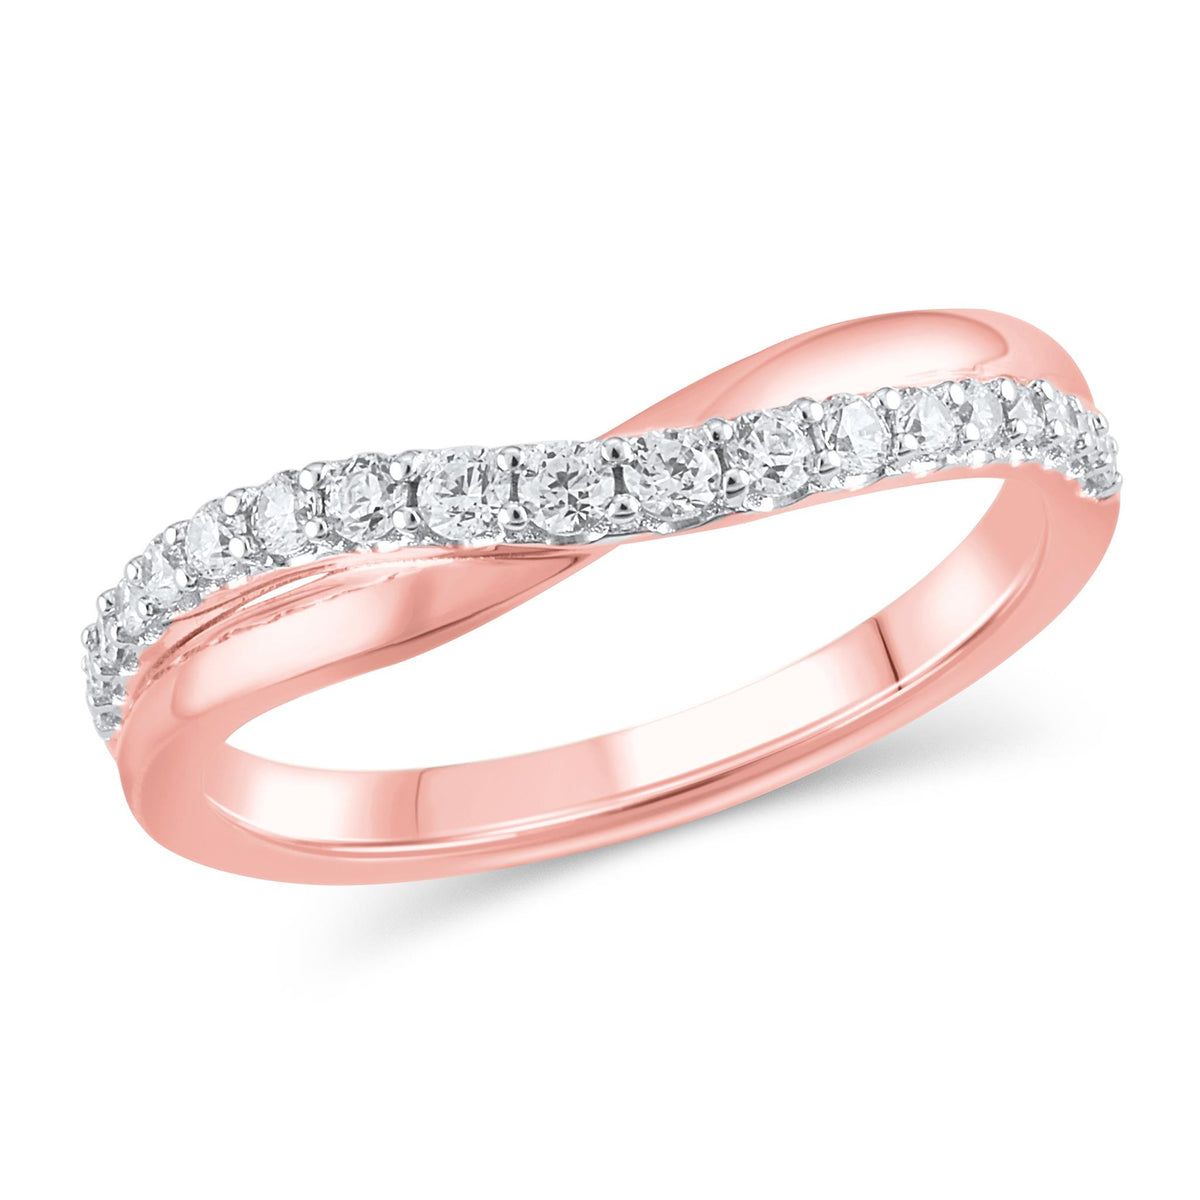 14Kt Rose Gold Curved Wedding Ring With 0.33cttw Natural Diamonds